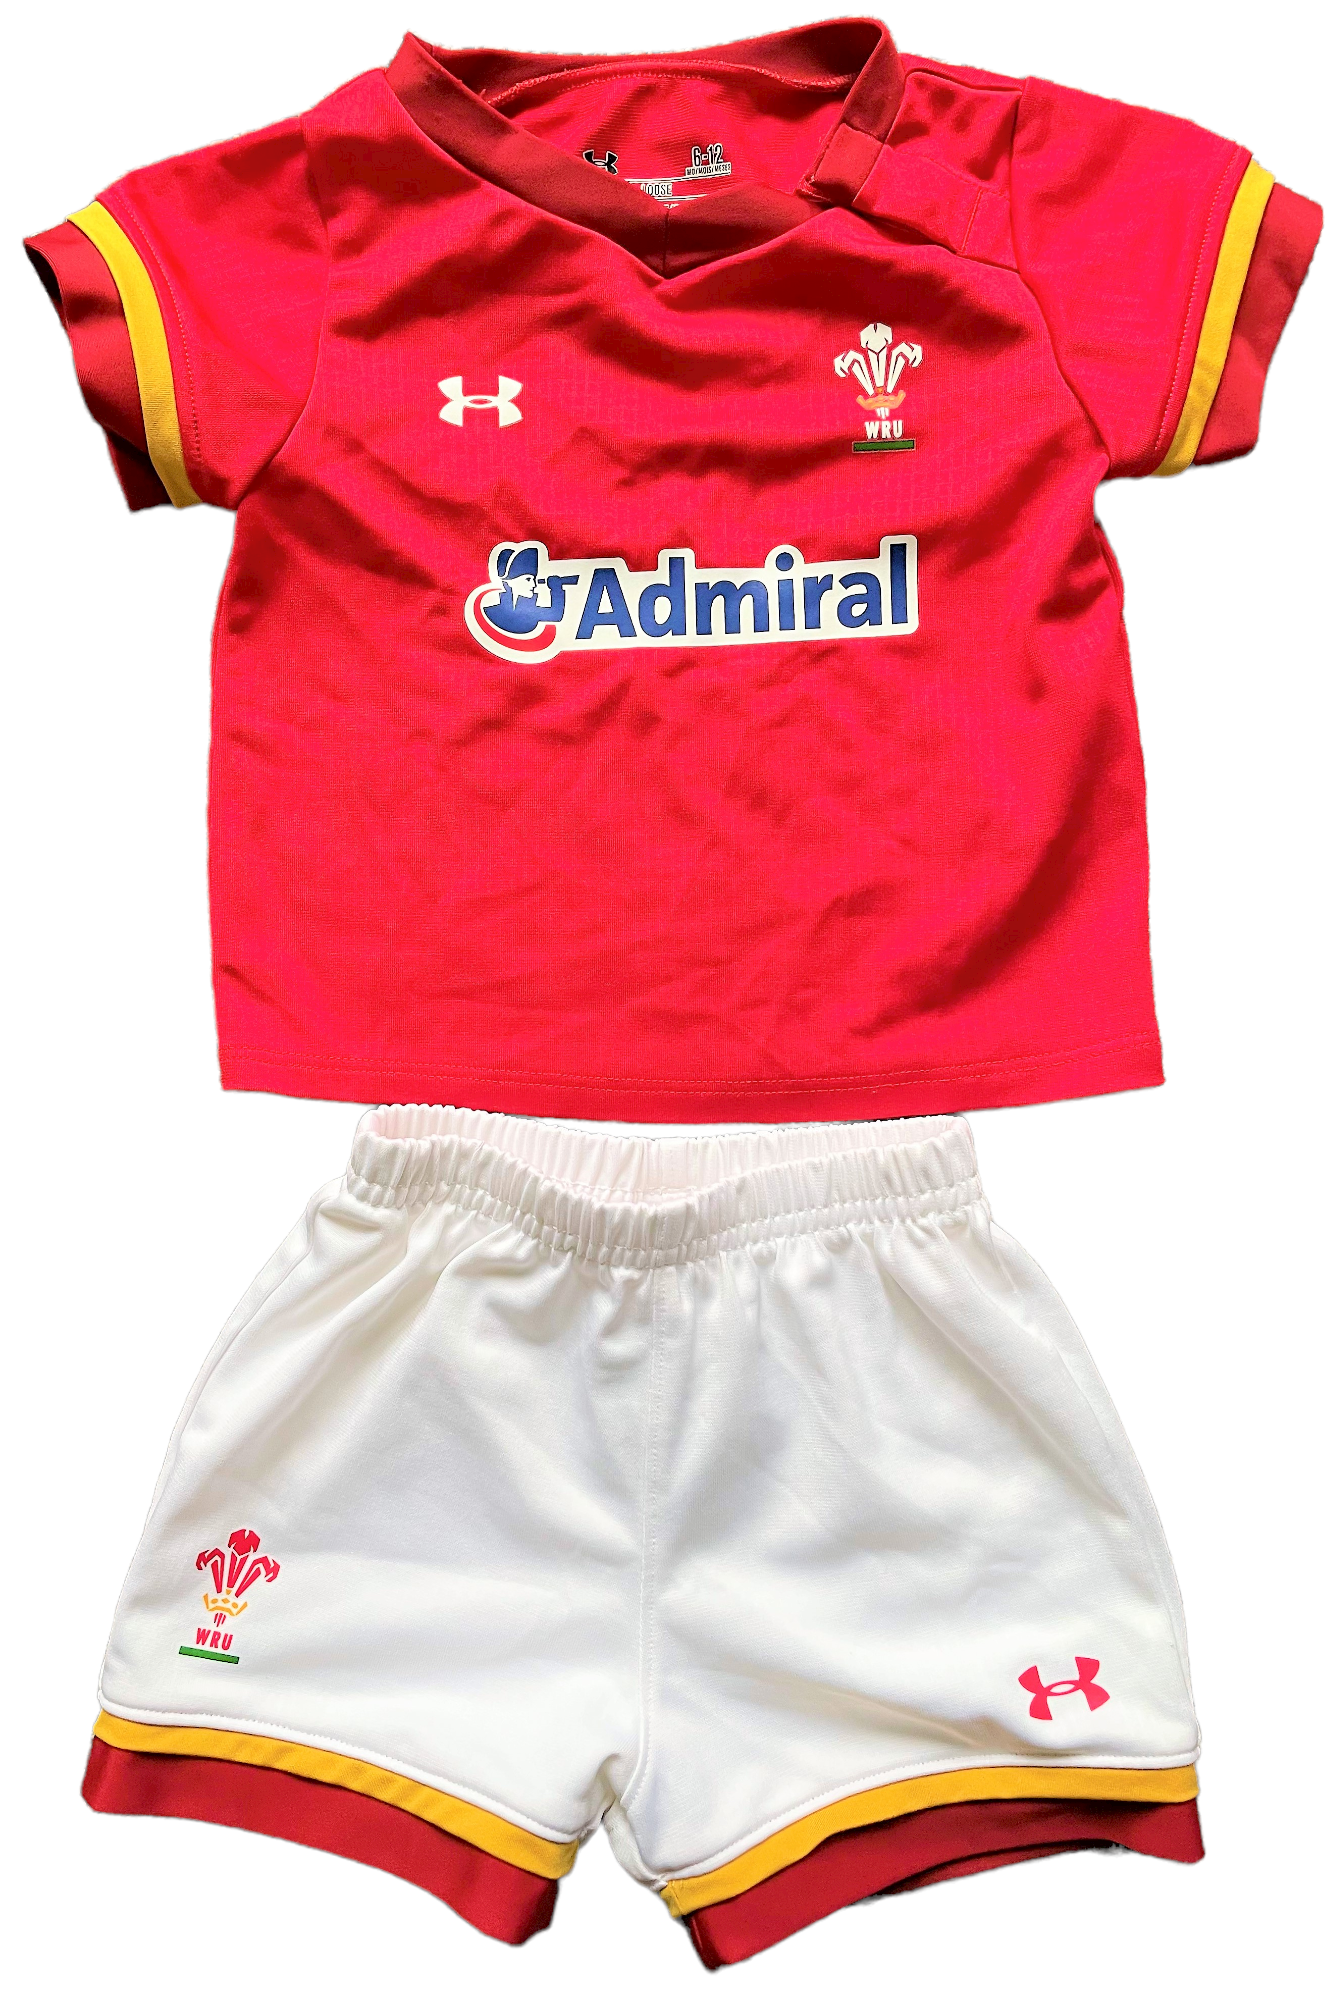 2015-16 Wales Rugby Kit. Shirt and Shorts (excellent) 6 to 12 months